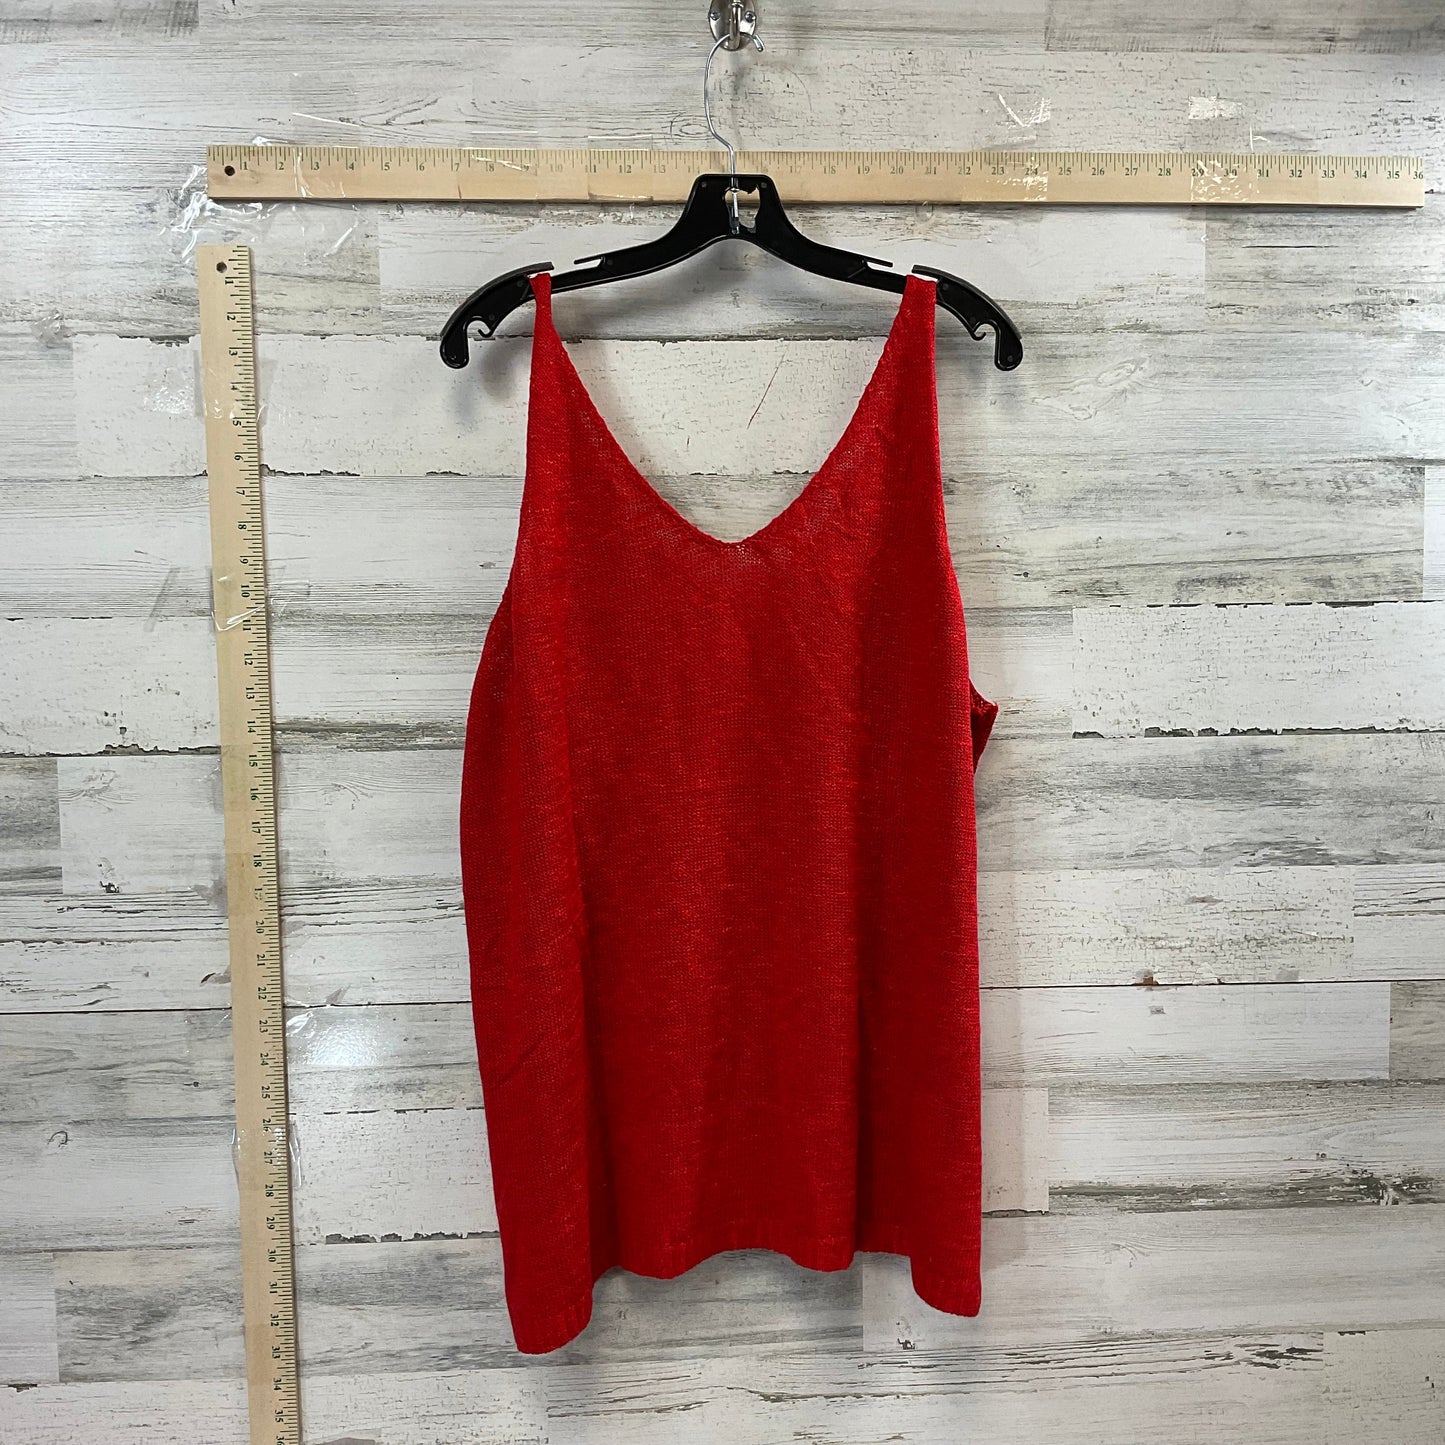 Red Top Sleeveless Maurices, Size 3x